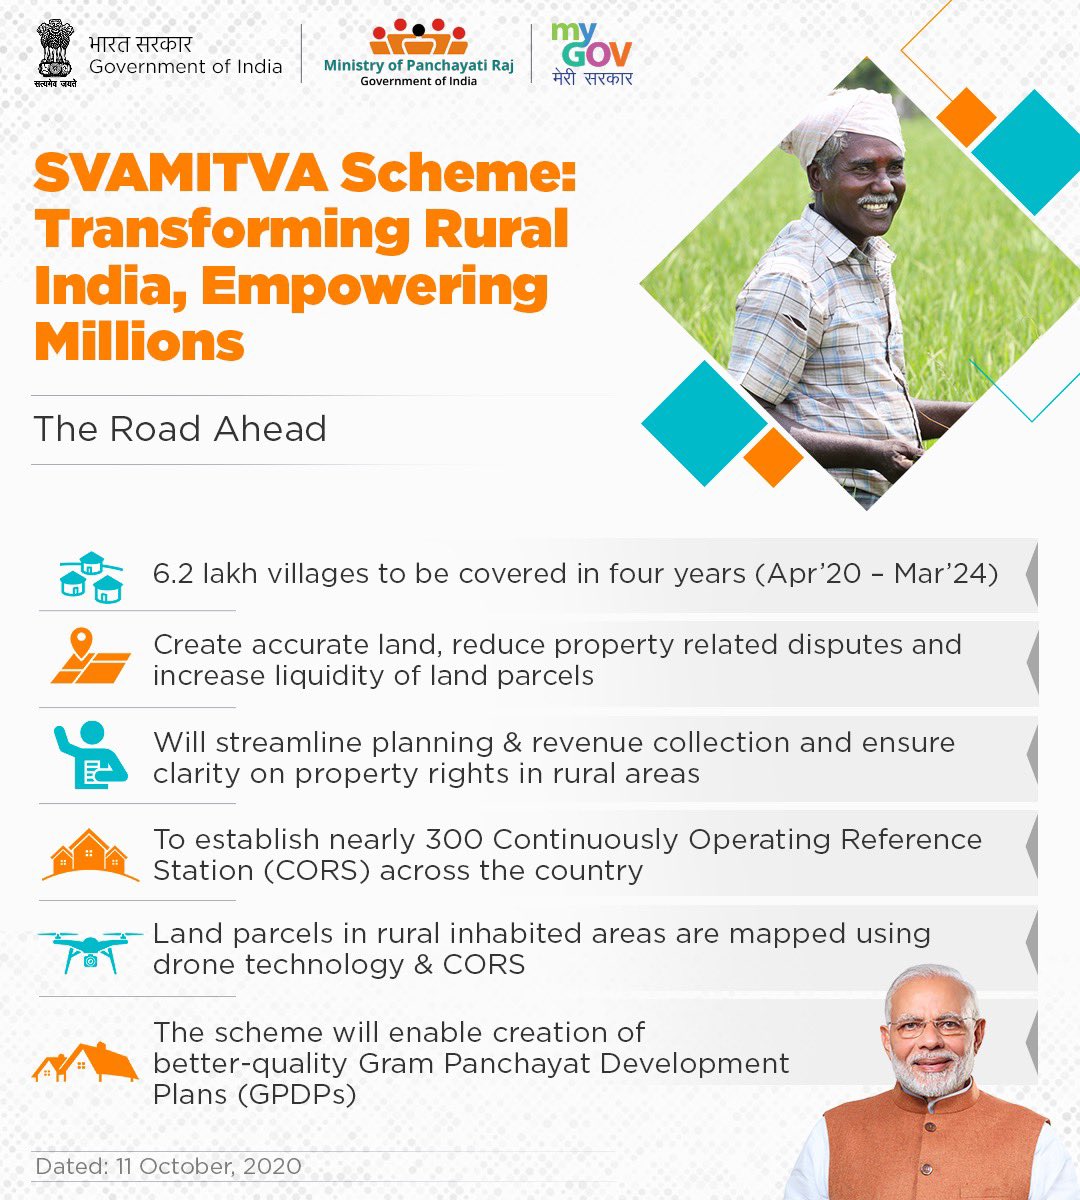 PM launches physical distribution of Property Cards under the SVAMITVA Scheme